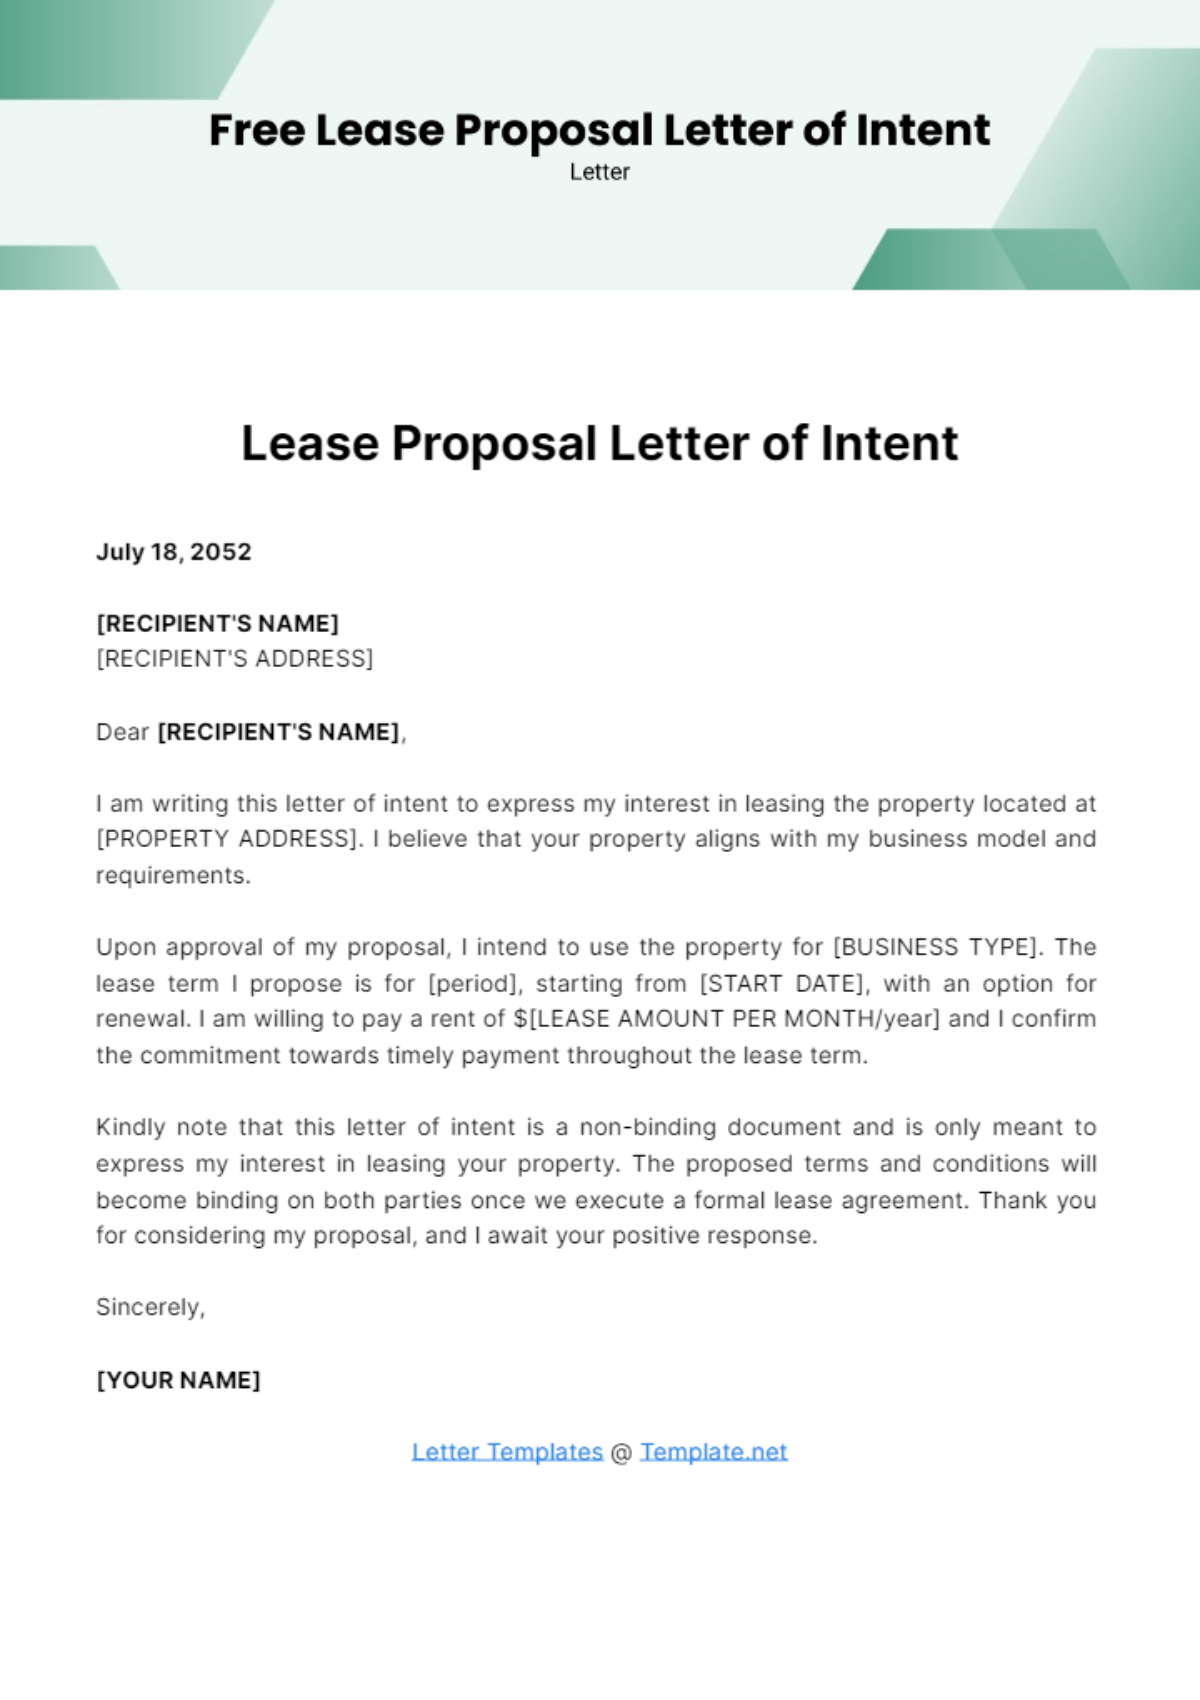 Lease Proposal Letter of Intent Template